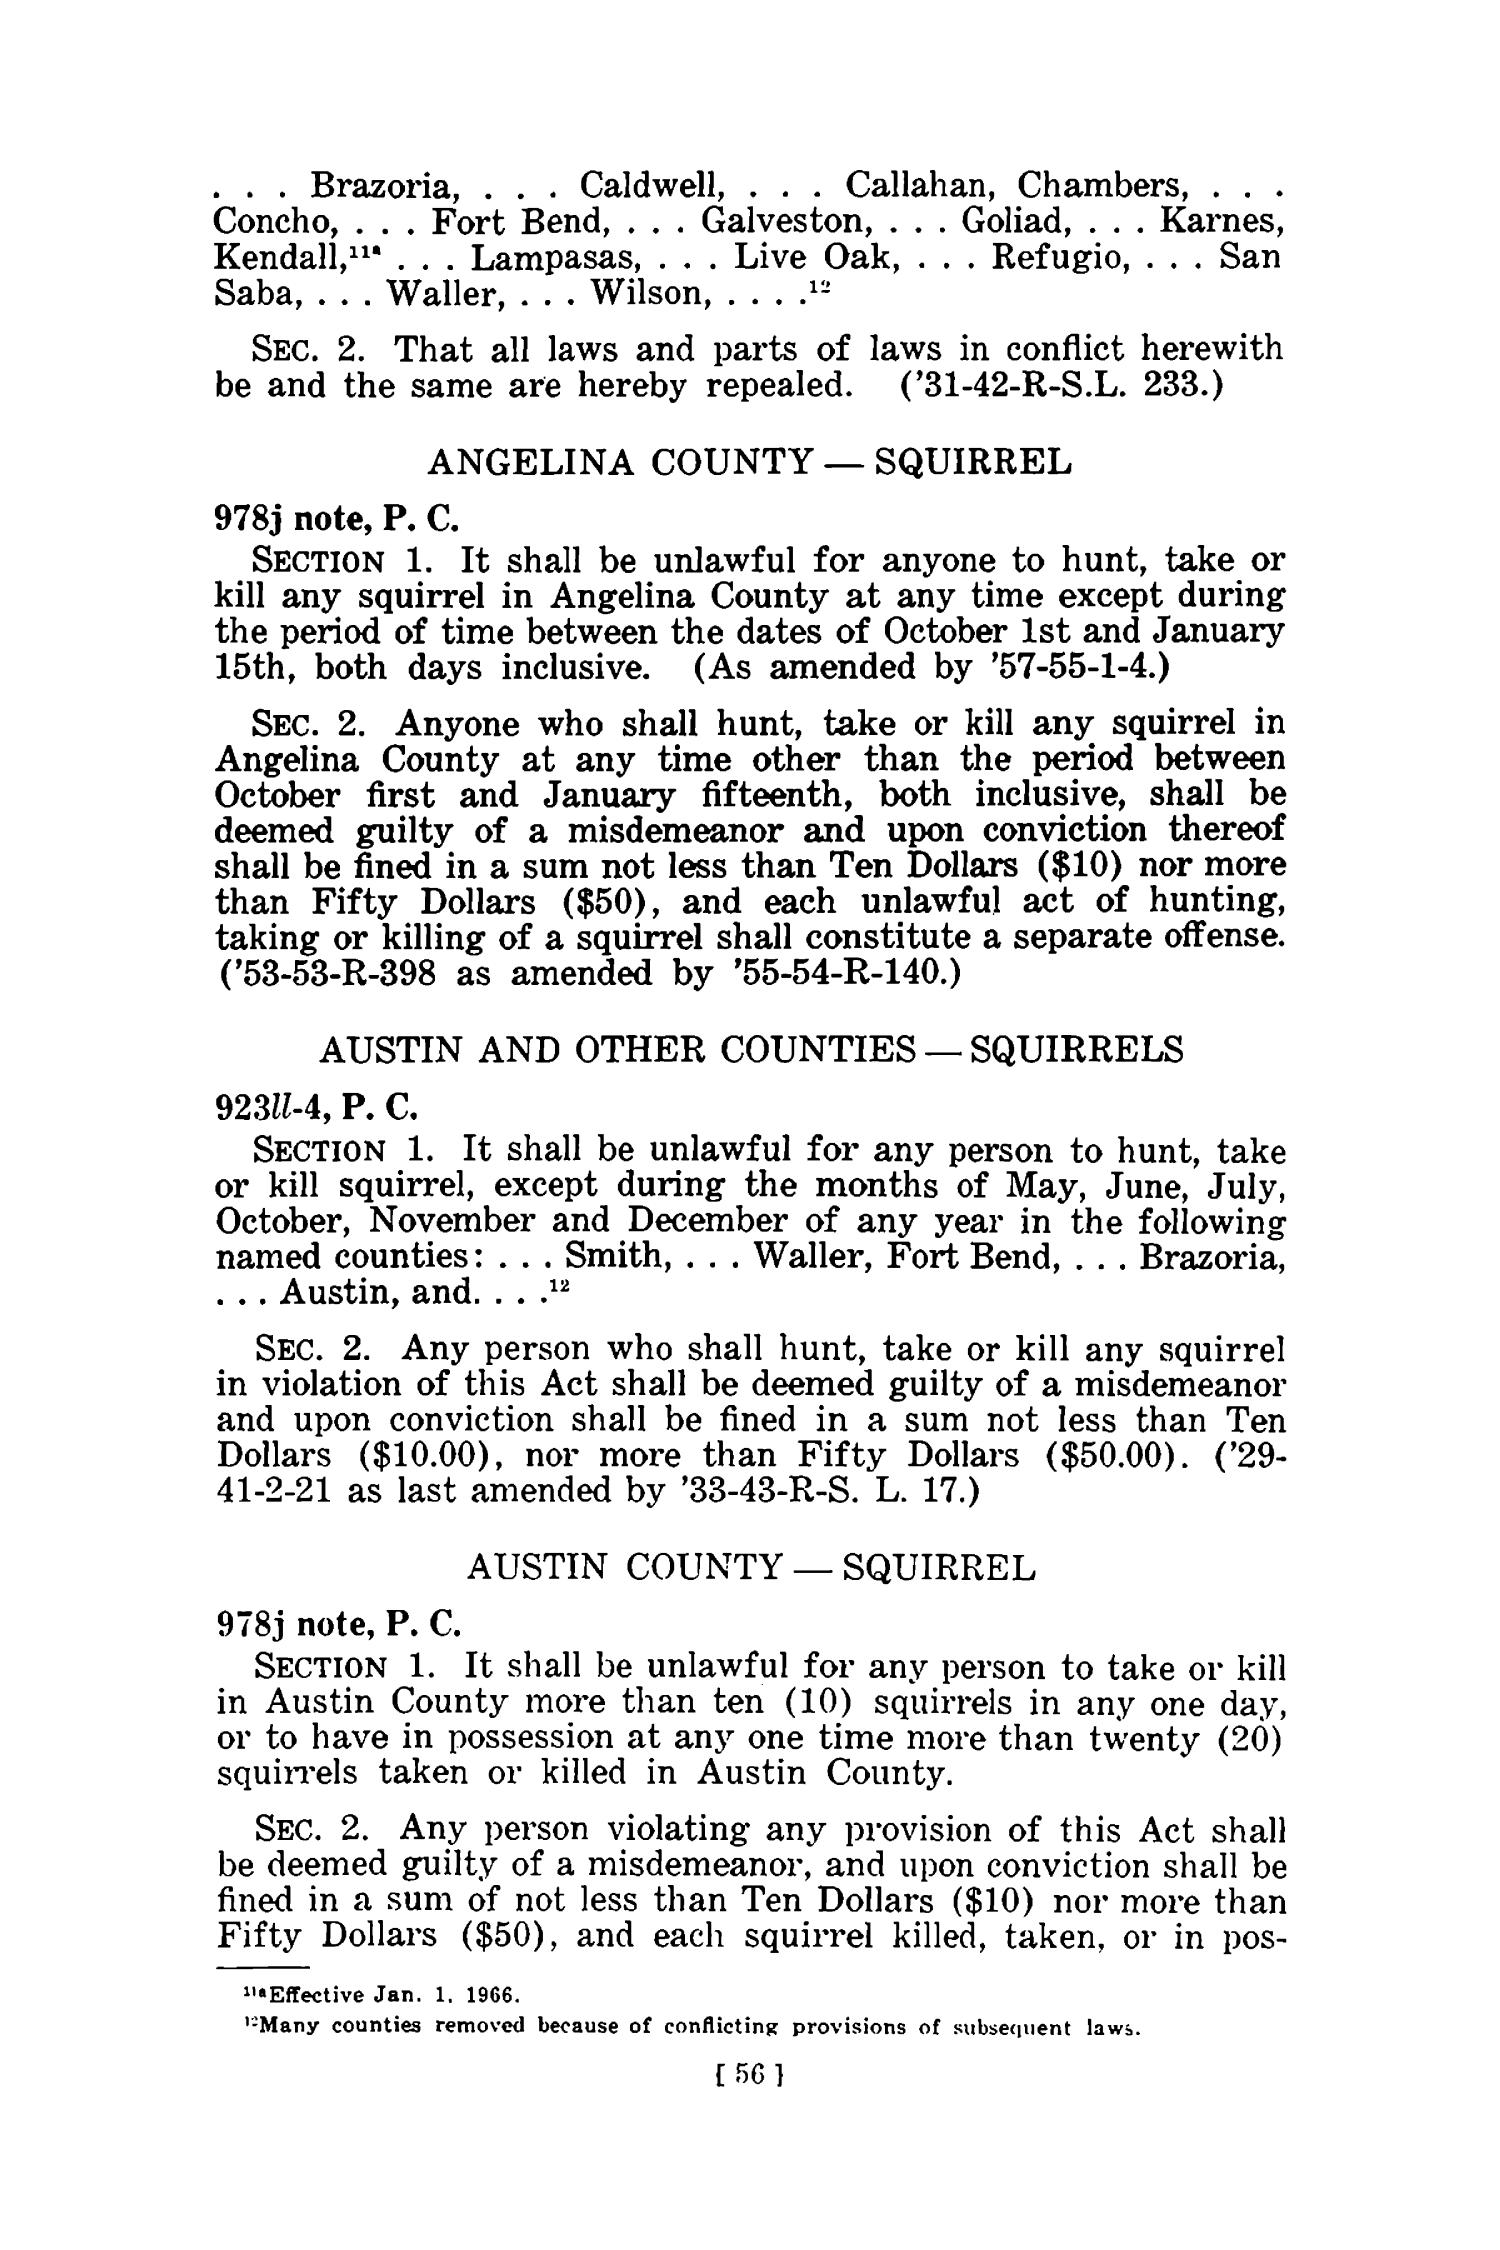 Full Text of the Game, Fish and Fur Laws of Texas with citations of Park Laws, 1965
                                                
                                                    56
                                                